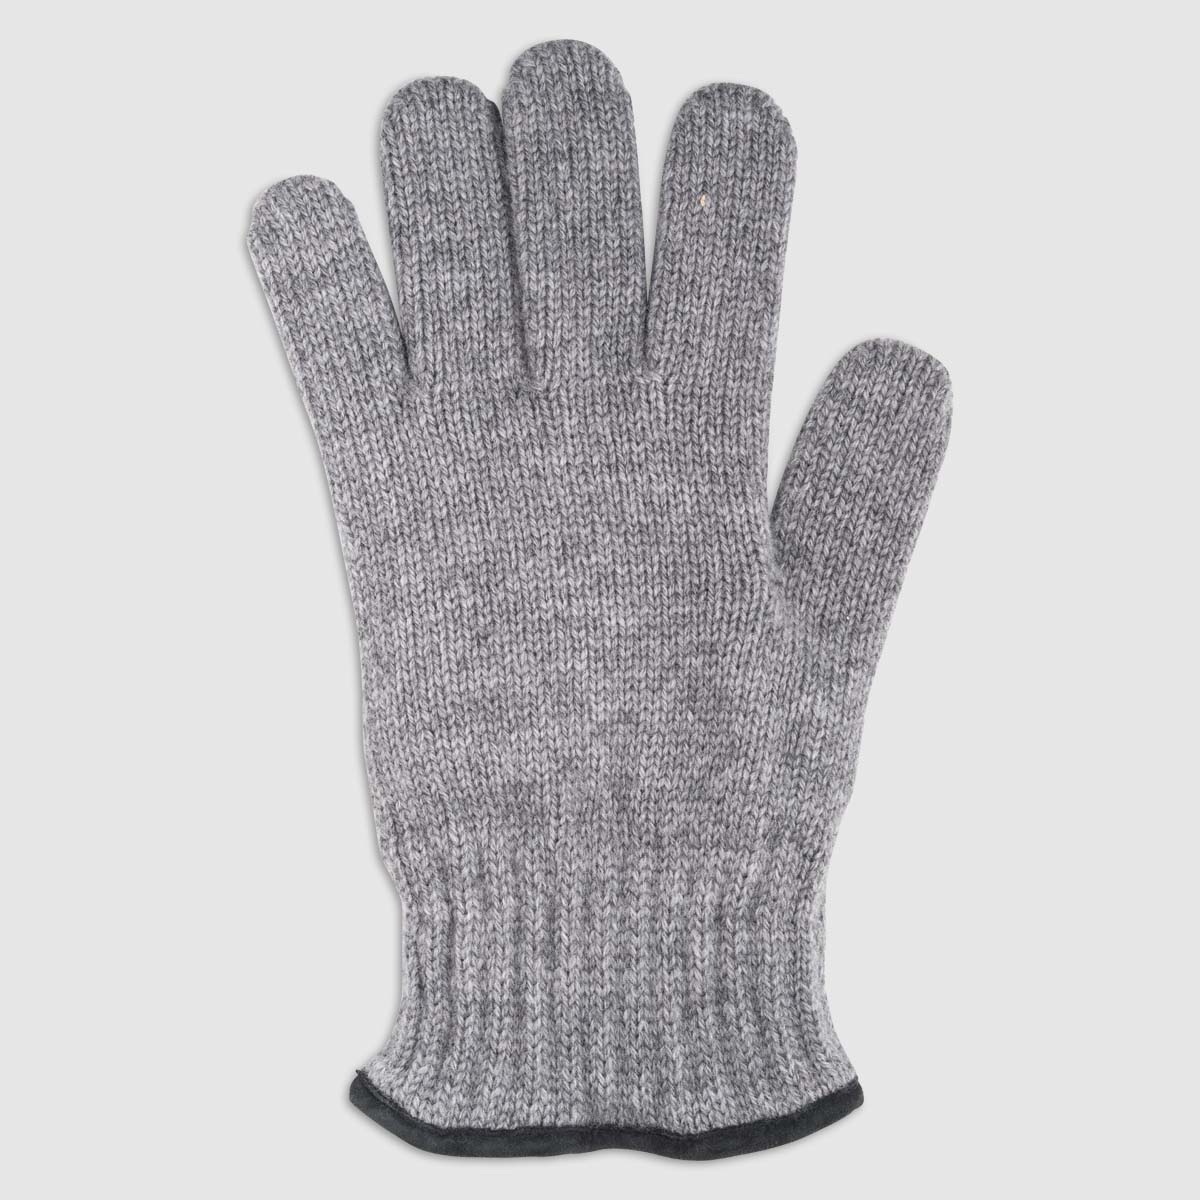 Wool Glove with Suede Palm – L